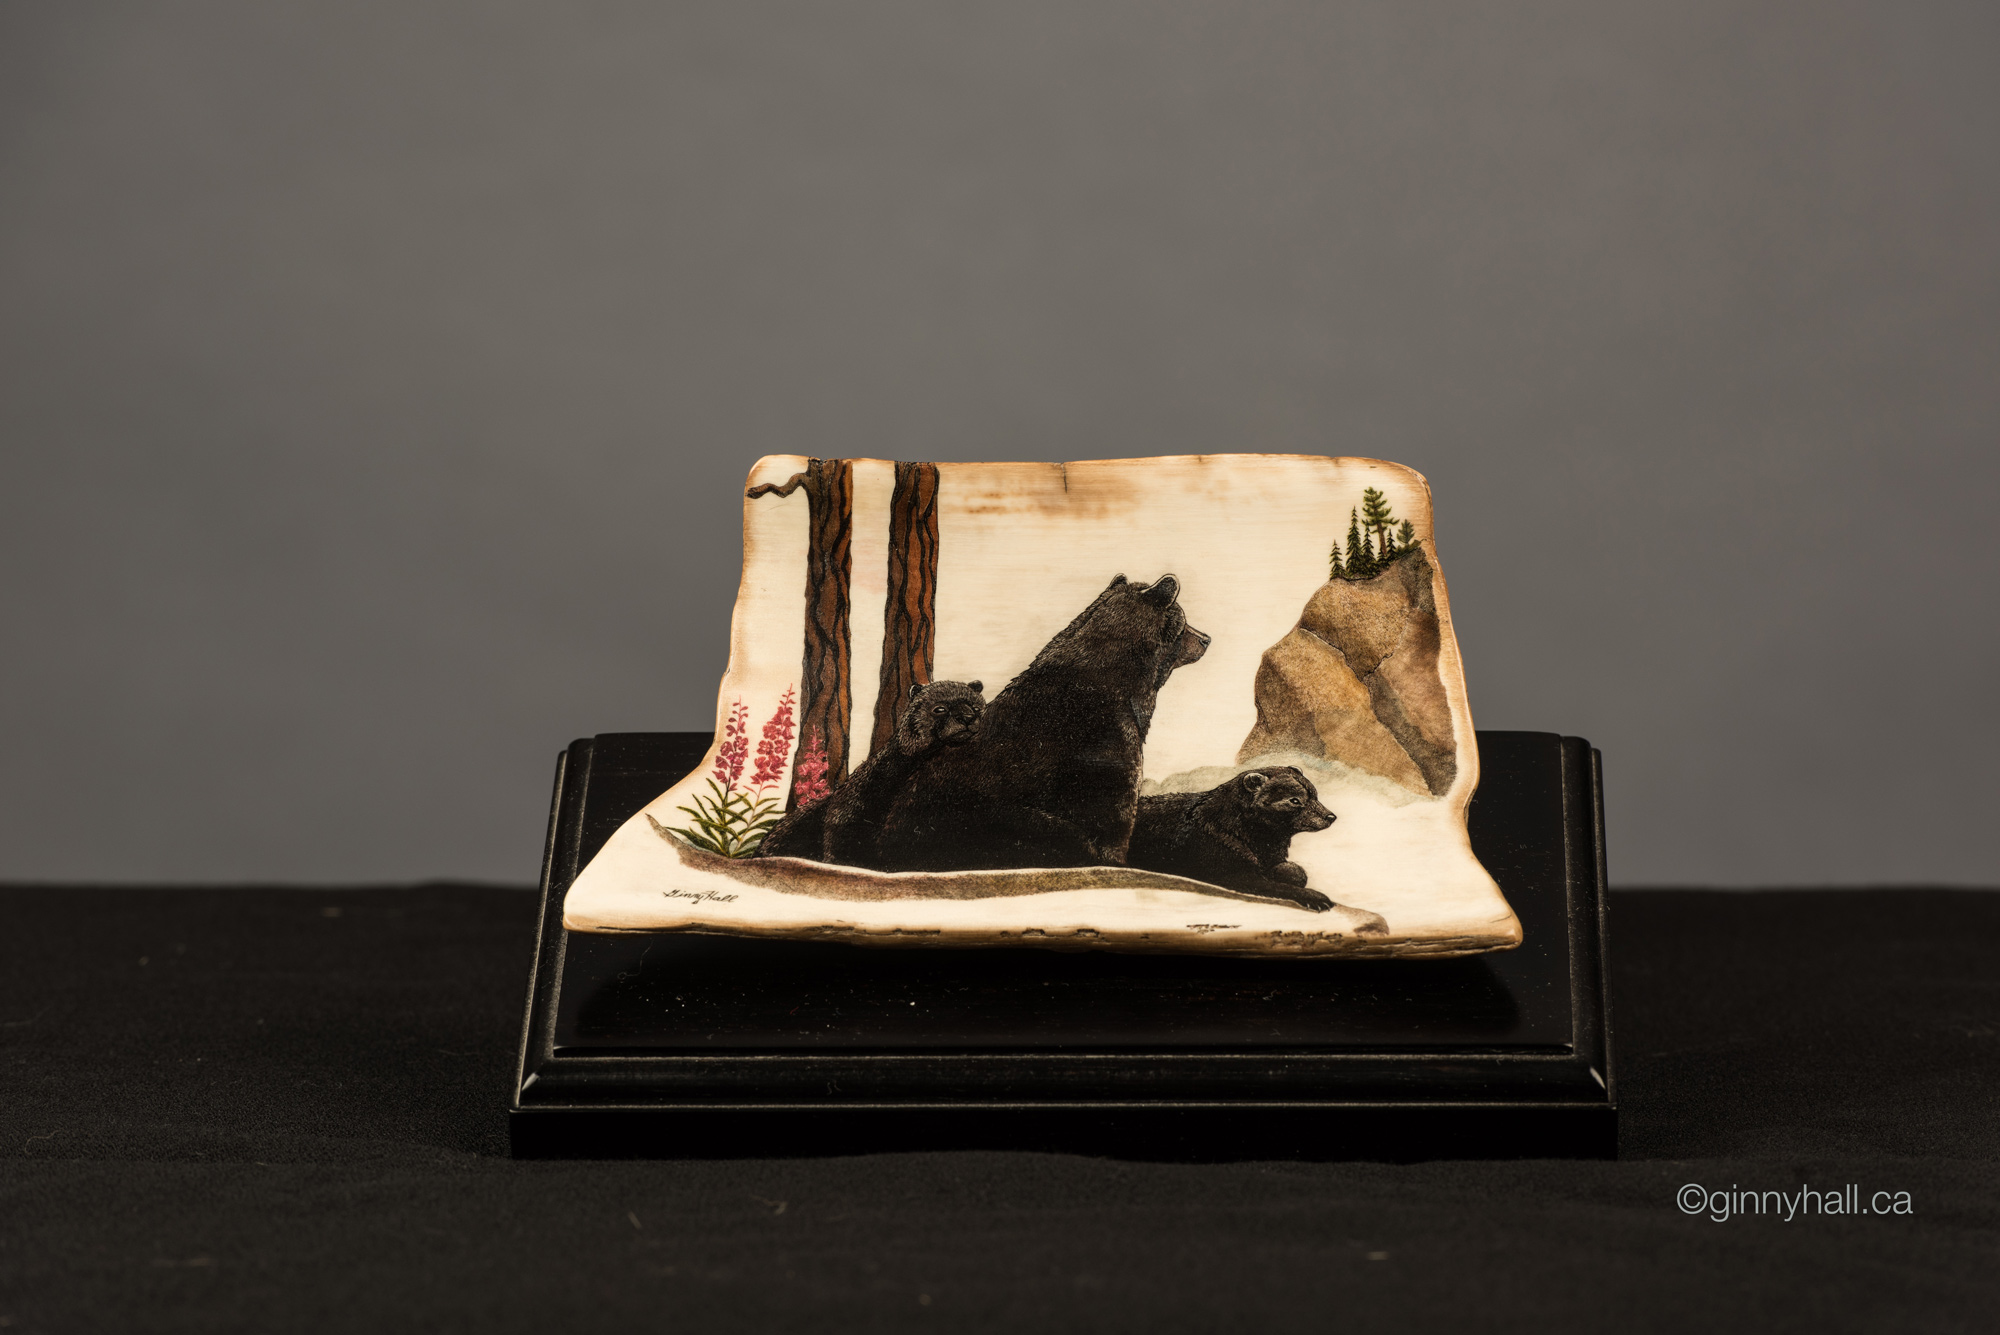 A scrimshaw peice by Ginny Hall depicting two black bears.